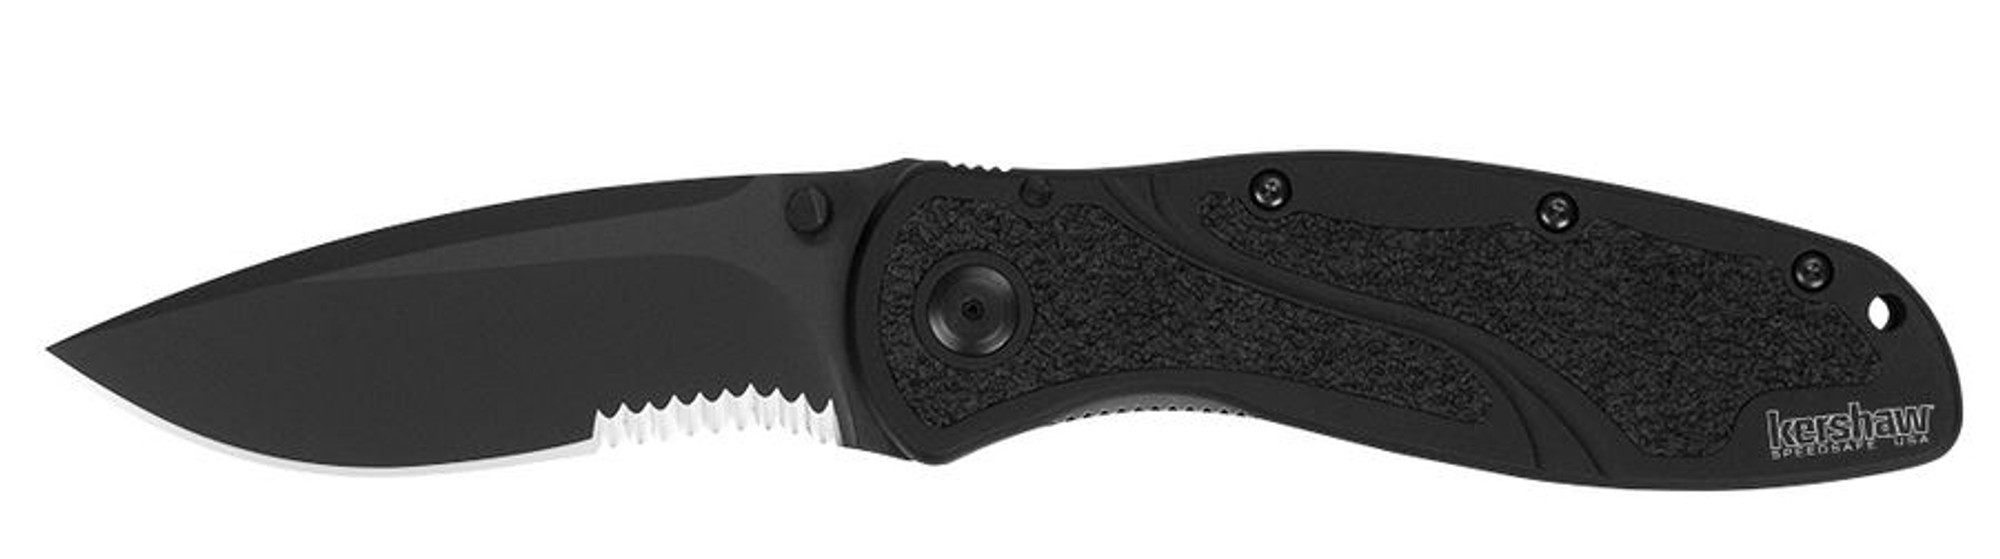 Kershaw 1670BLKST Blur Black Partially Serrated Assisted Opening